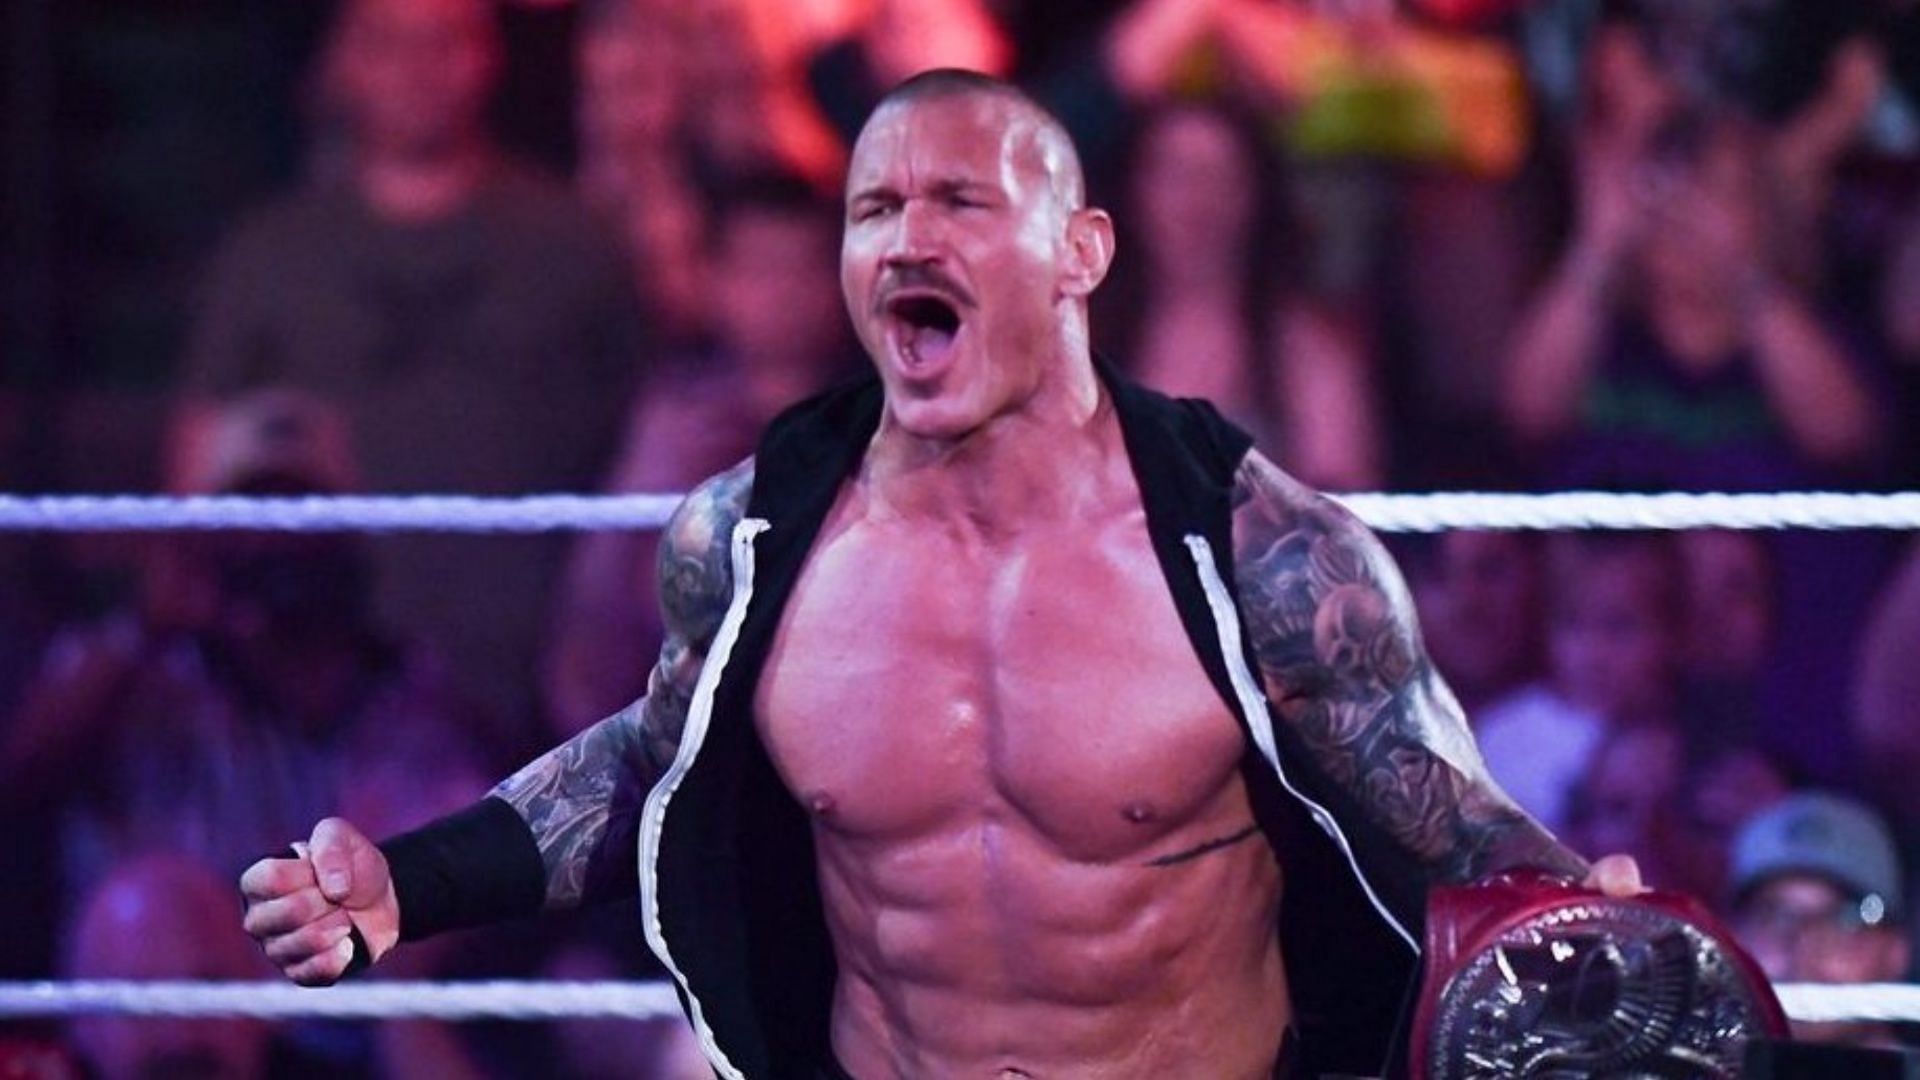 Randy Orton last competed on the May 20, 2022, episode of WWE SmackDown.